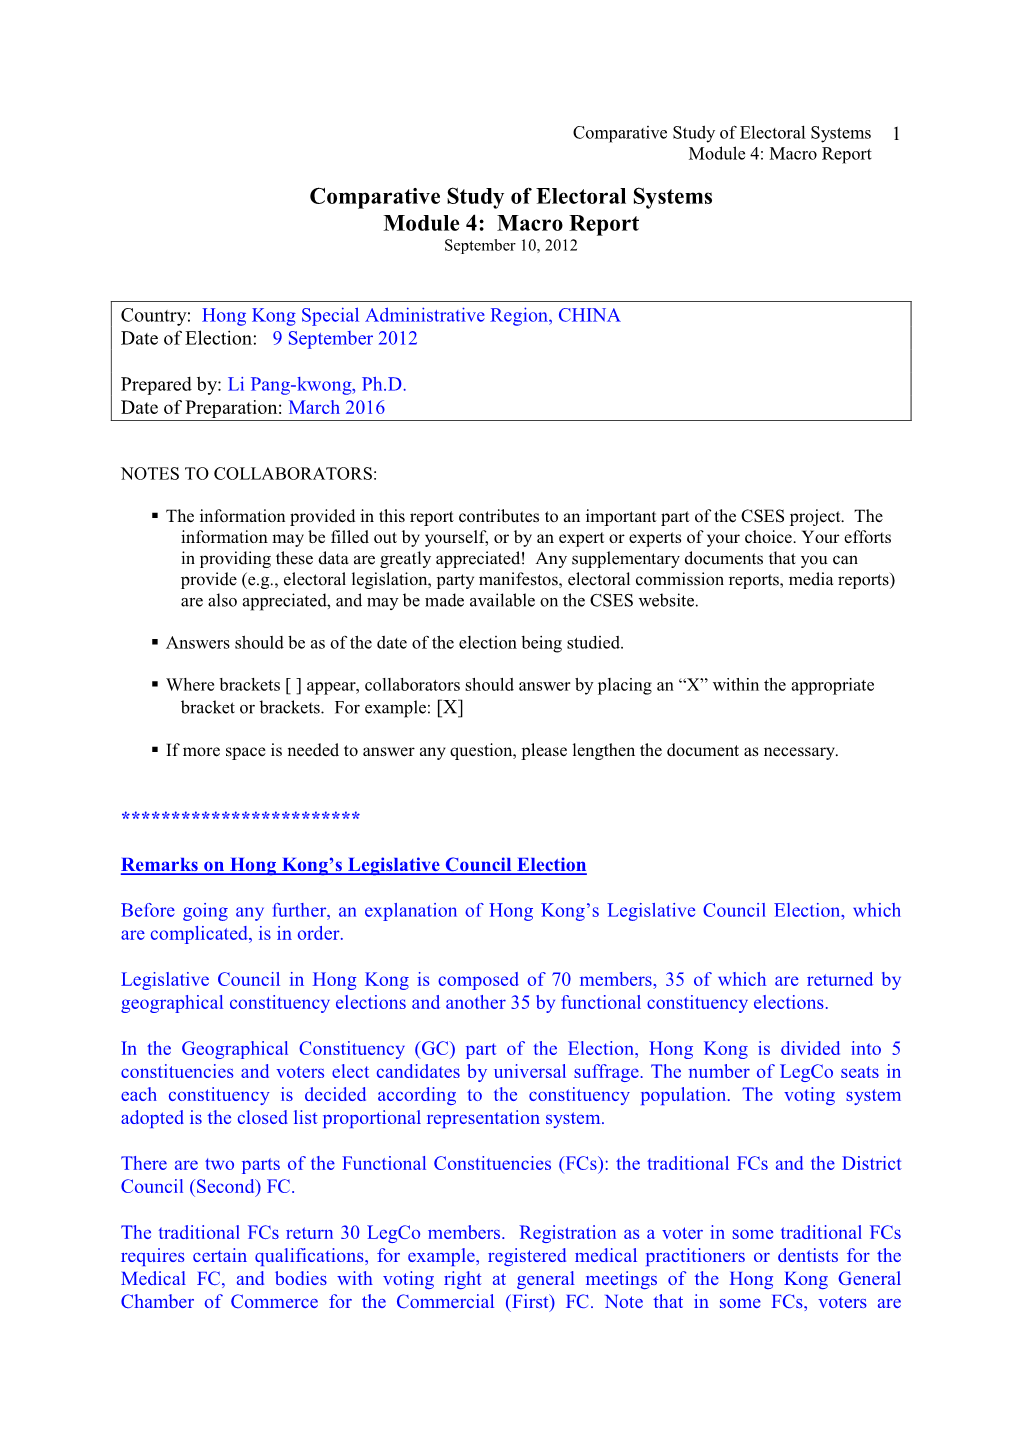 Macro Report Comparative Study of Electoral Systems Module 4: Macro Report September 10, 2012